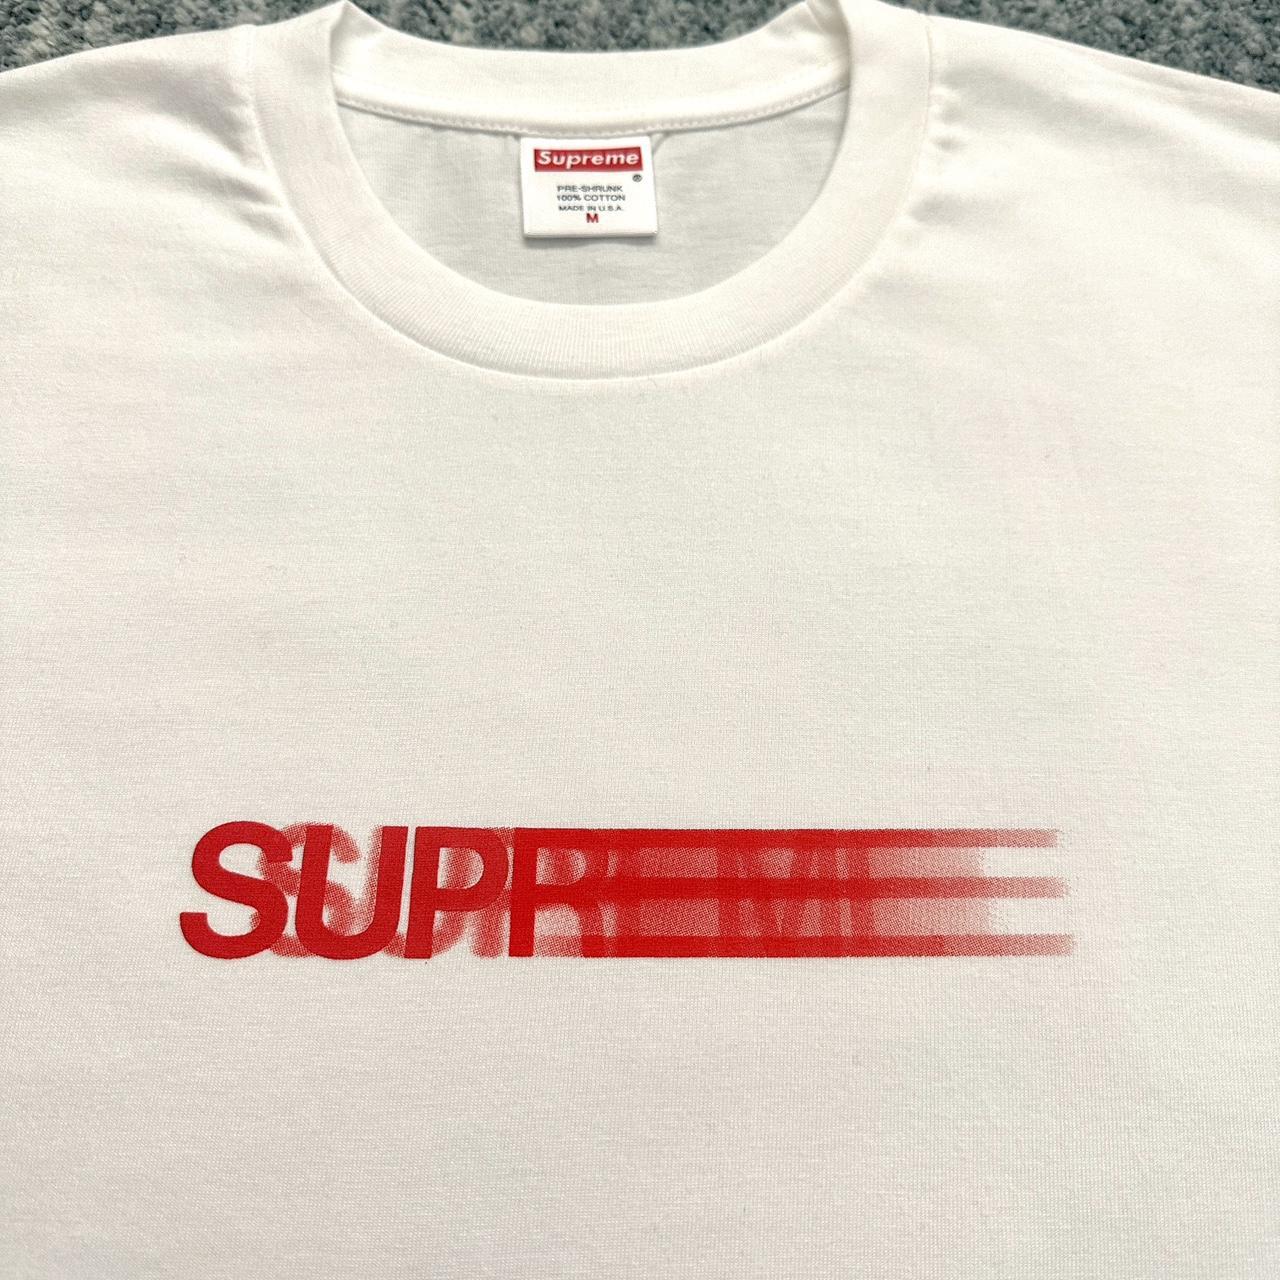 Supreme Motion Logo Tee Size M Used and in great... - Depop